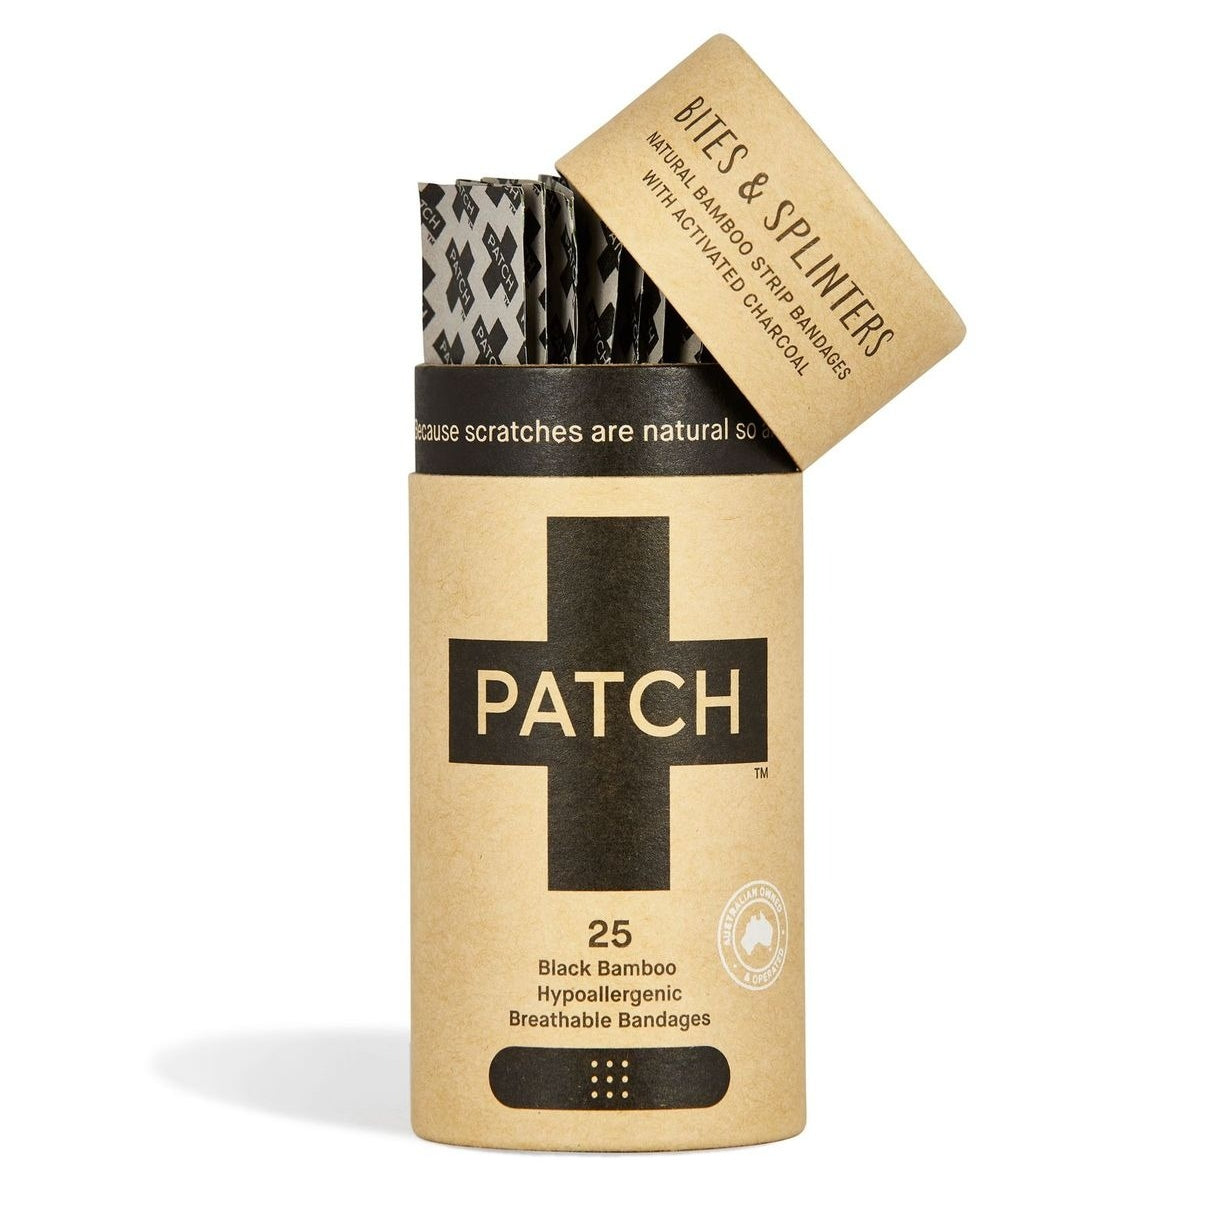 Patch Bamboo Bandage — Activated Charcoal